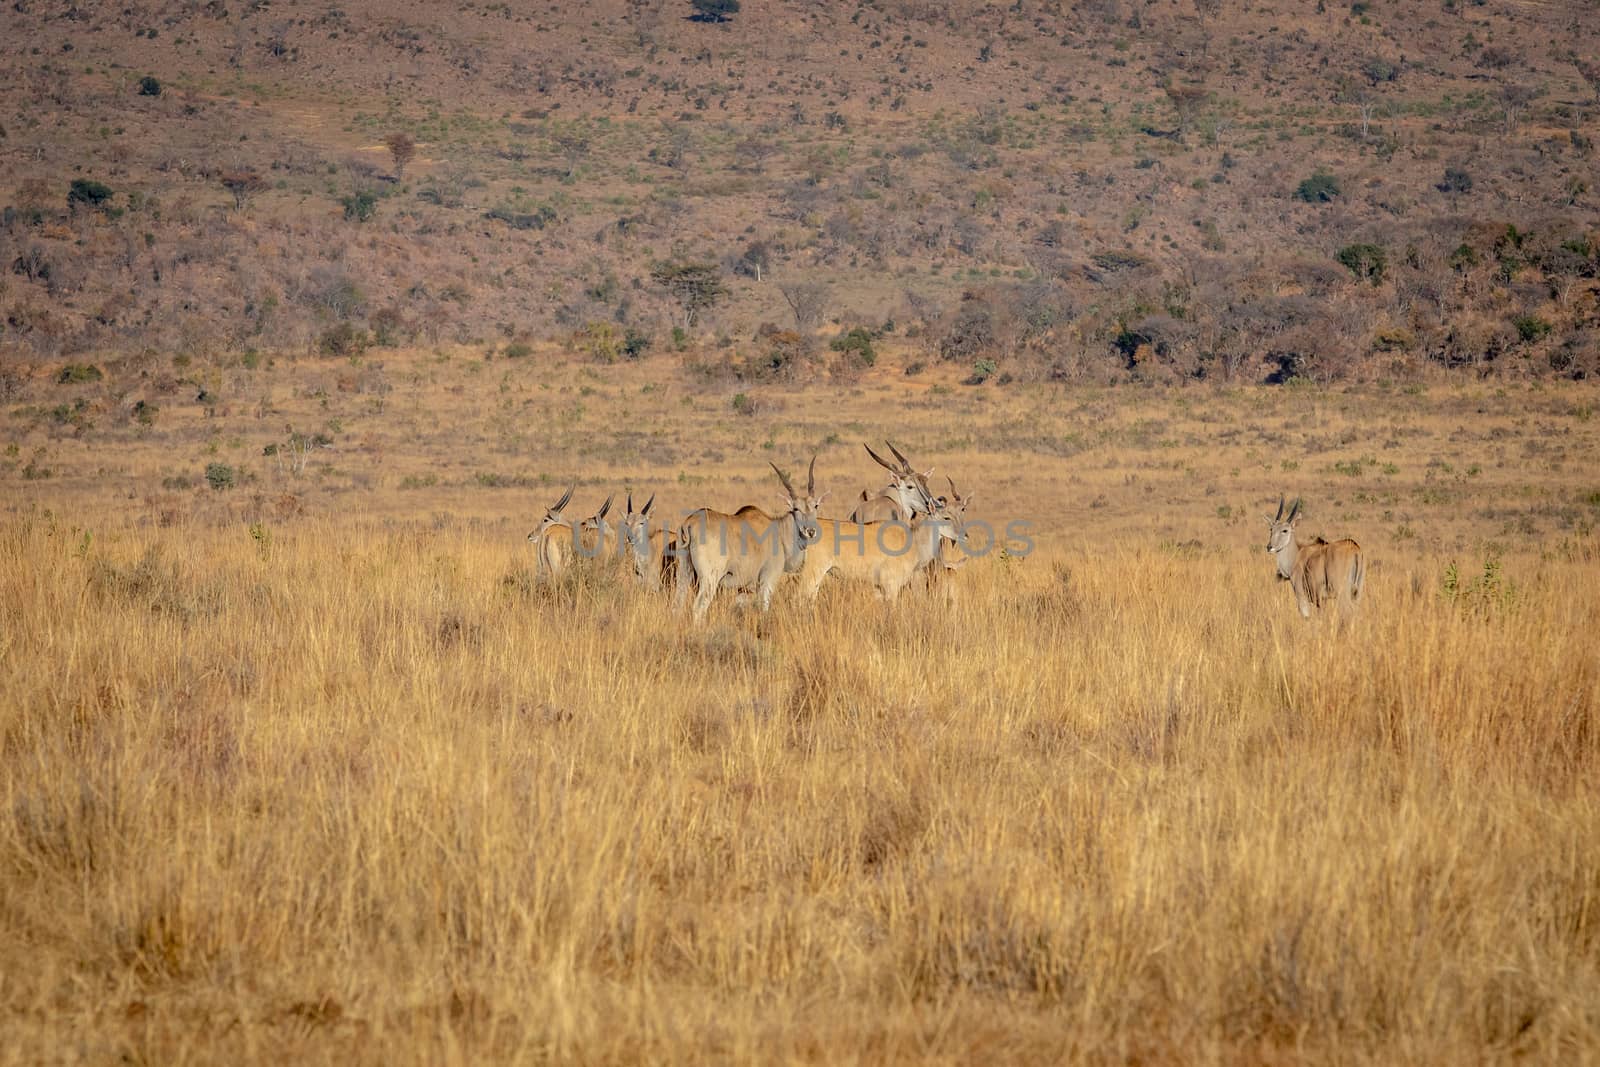 Herd of Elands in the high grass. by Simoneemanphotography